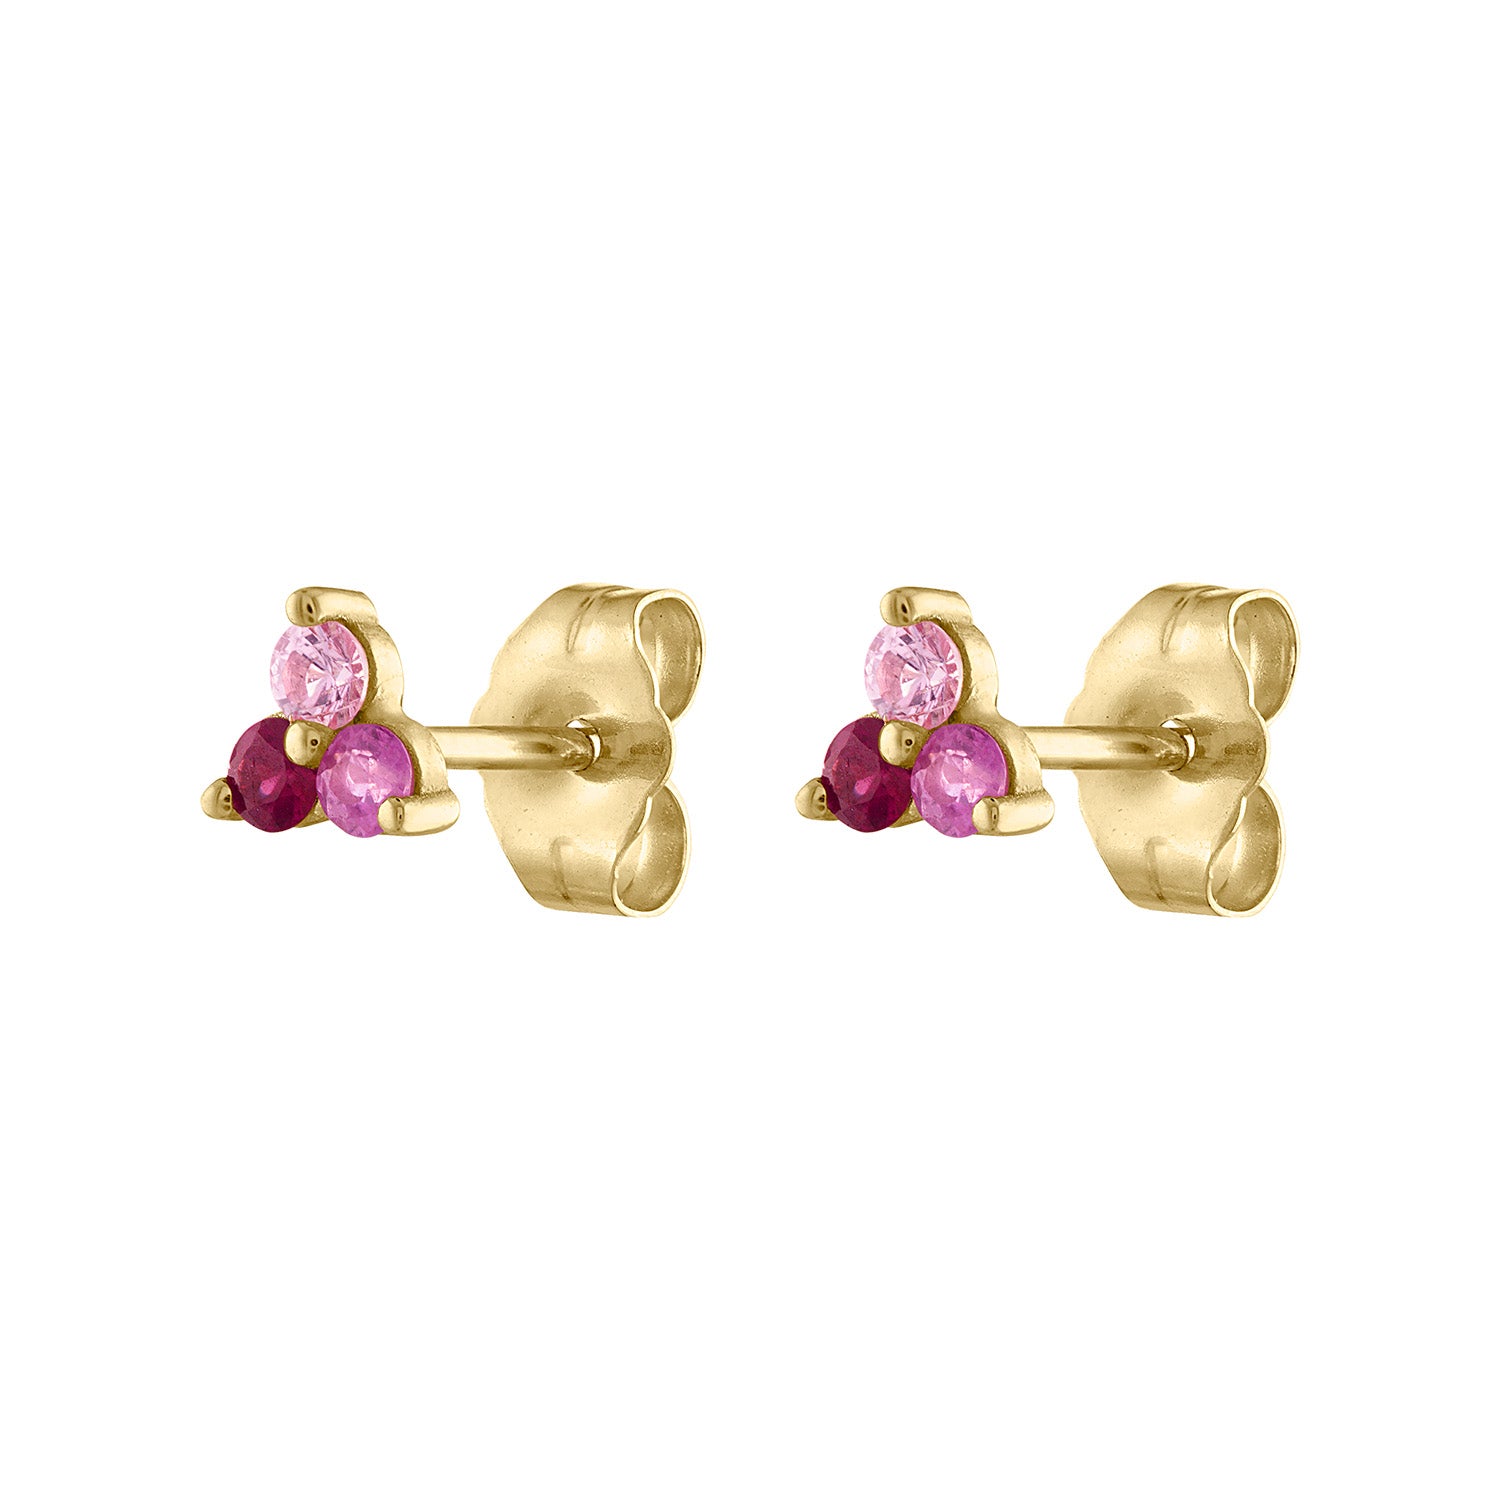 Trio of ruby and pink sapphire stud earrings in 14k yellow gold